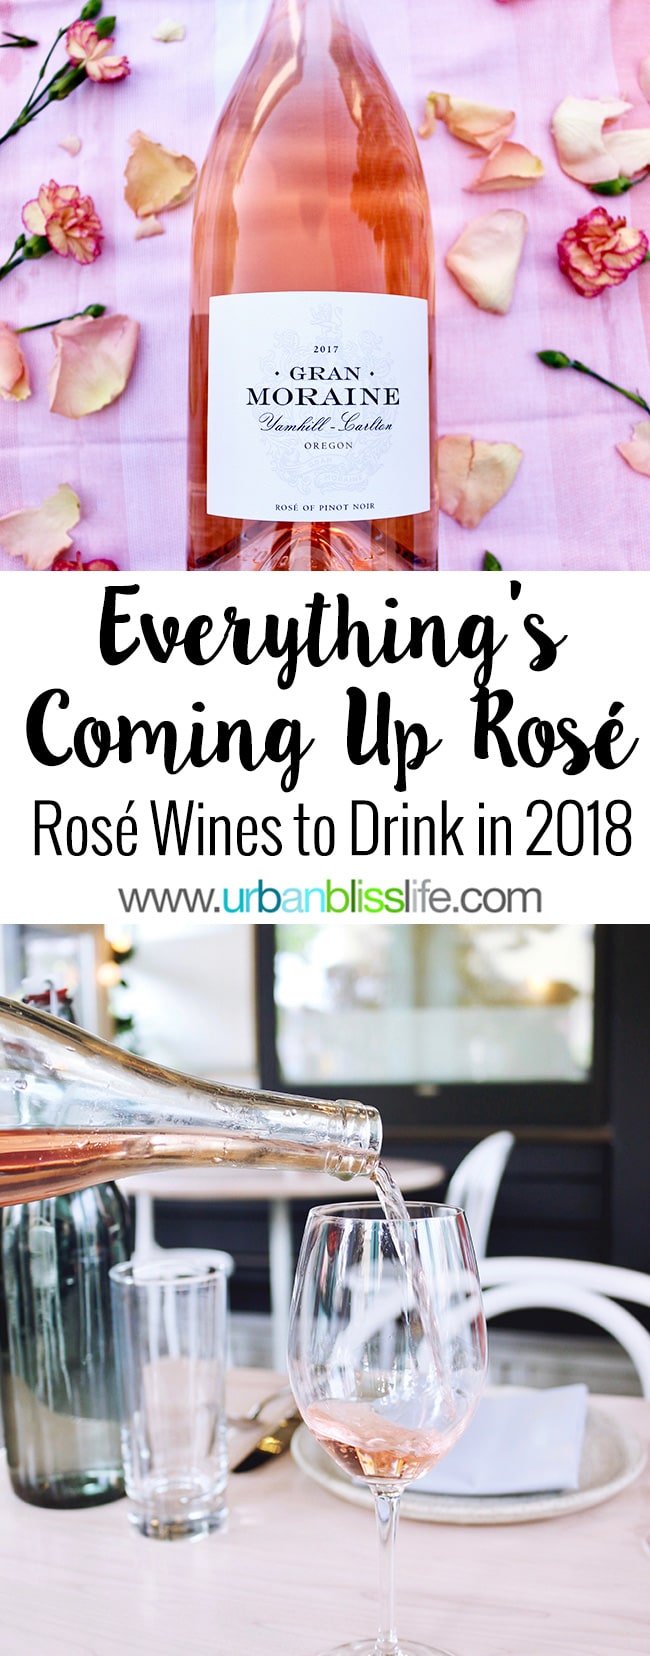 Rosé wines to drink in 2018, on UrbanBlissLife.com